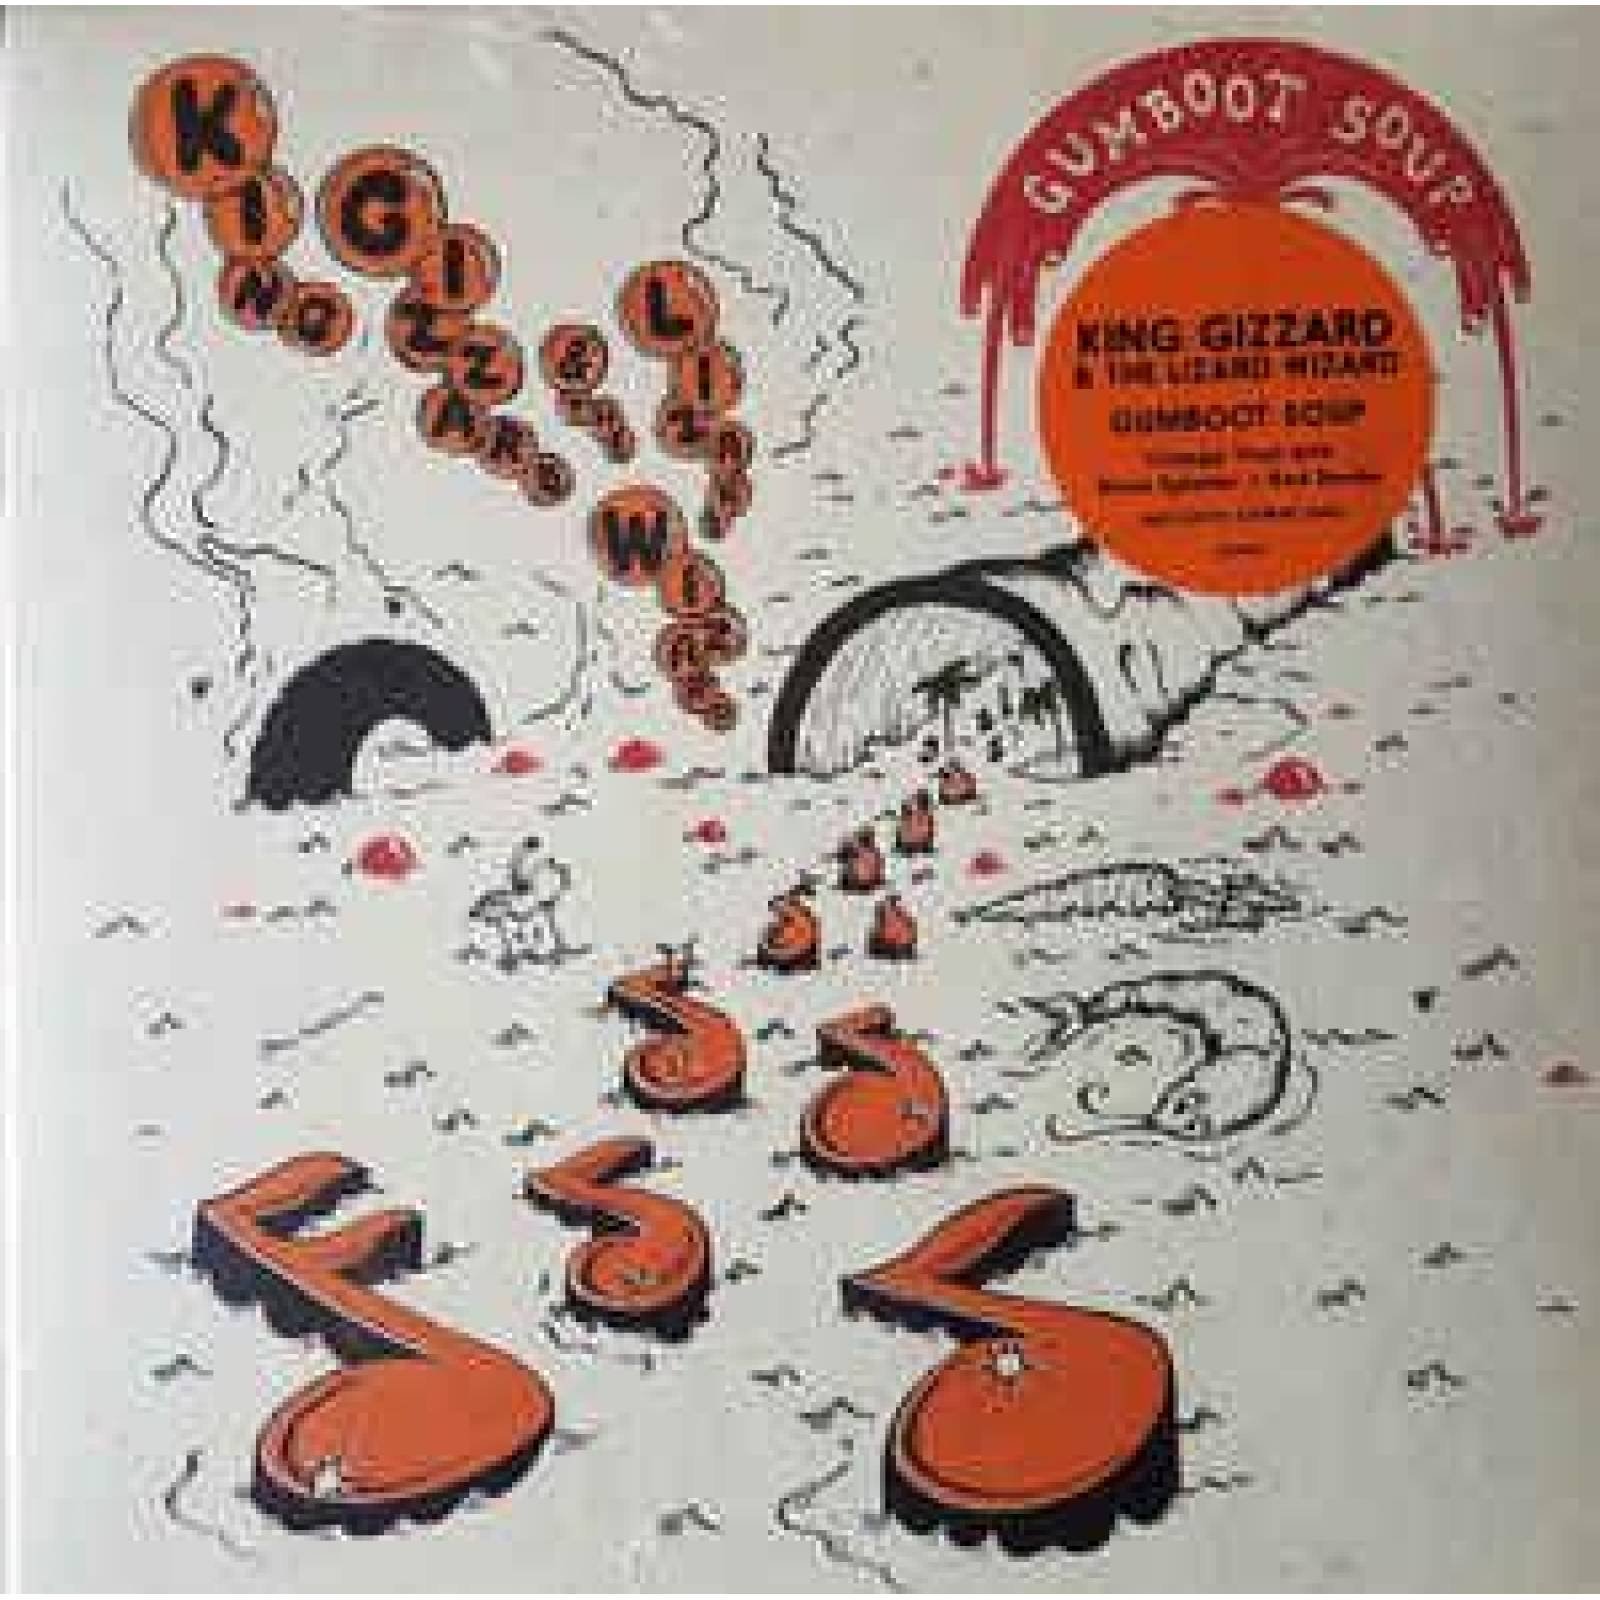 King Gizzard And The Lizard Wizard: Gumboot Soup Vinilo 